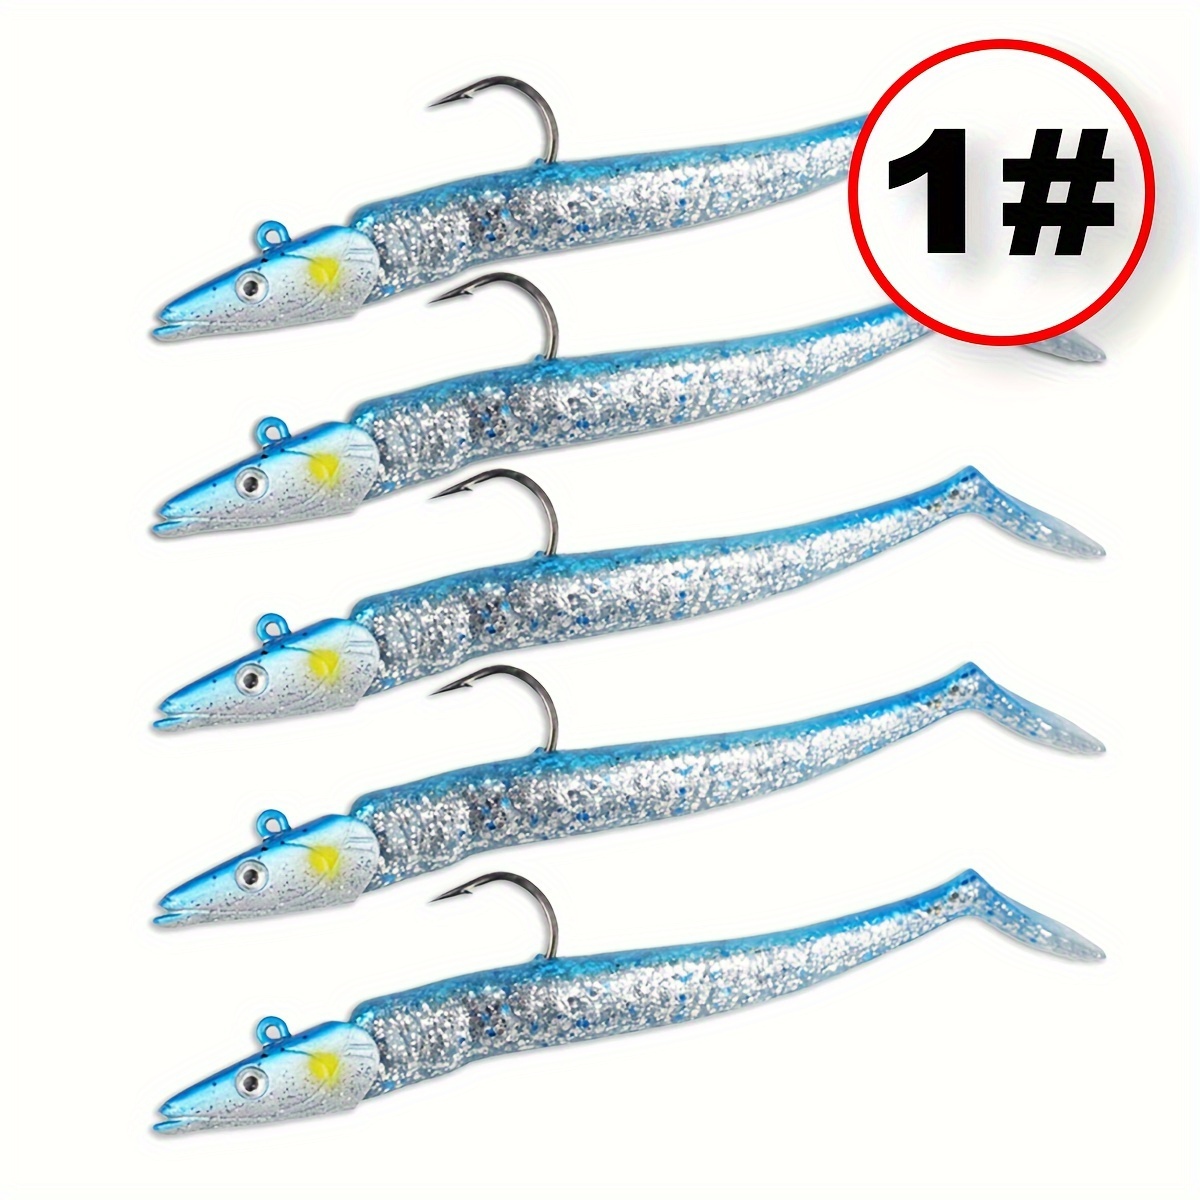 5pcs 14cm Soft Fishing Lure, Paddle Tail Swimbait With Jig Head For  Saltwater Freshwater Fishing, Detachable Lure For Bass Walleye Rockfish